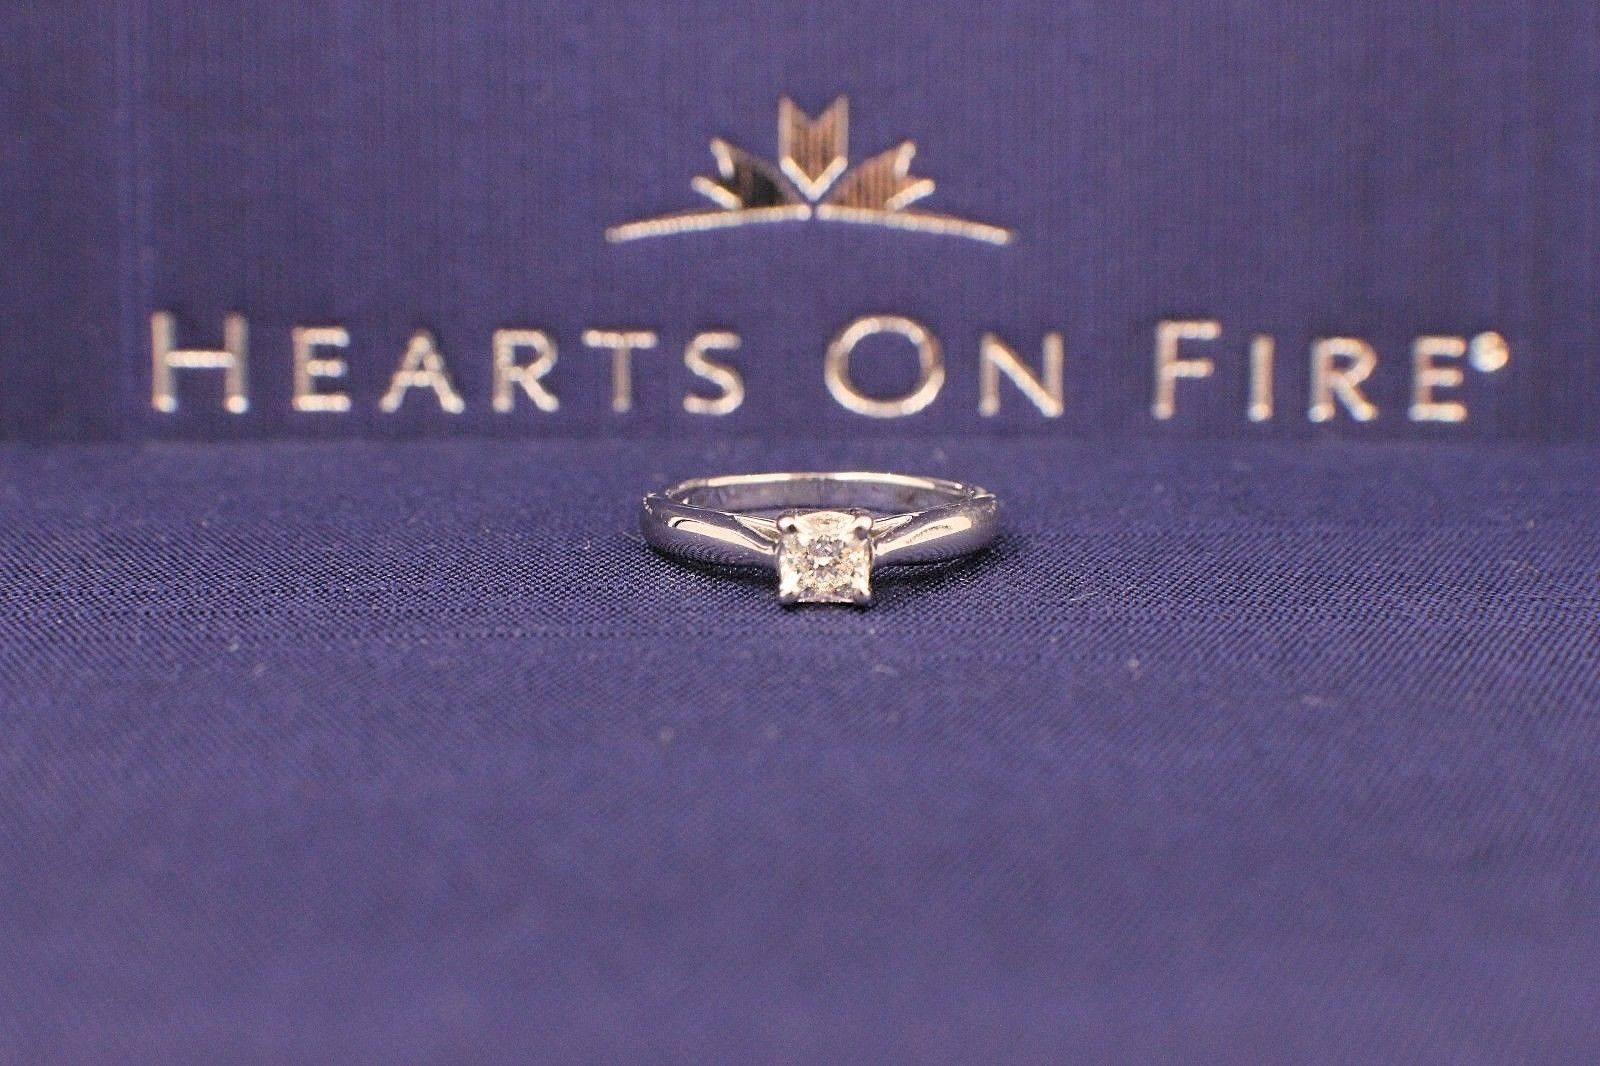 Brand:  HEARTS ON FIRE
Style of Setting:  4-Prong Dream Solitaire Engagement Ring
Serial Number:  HOF 8315
Metal:  White Gold 18KT
Size:  4.75 - sizable
Total Carat Weight:  0.44CTS
Color & Clarity:  G - H / VS - SI
Diamond Shape:  HOF DREAM